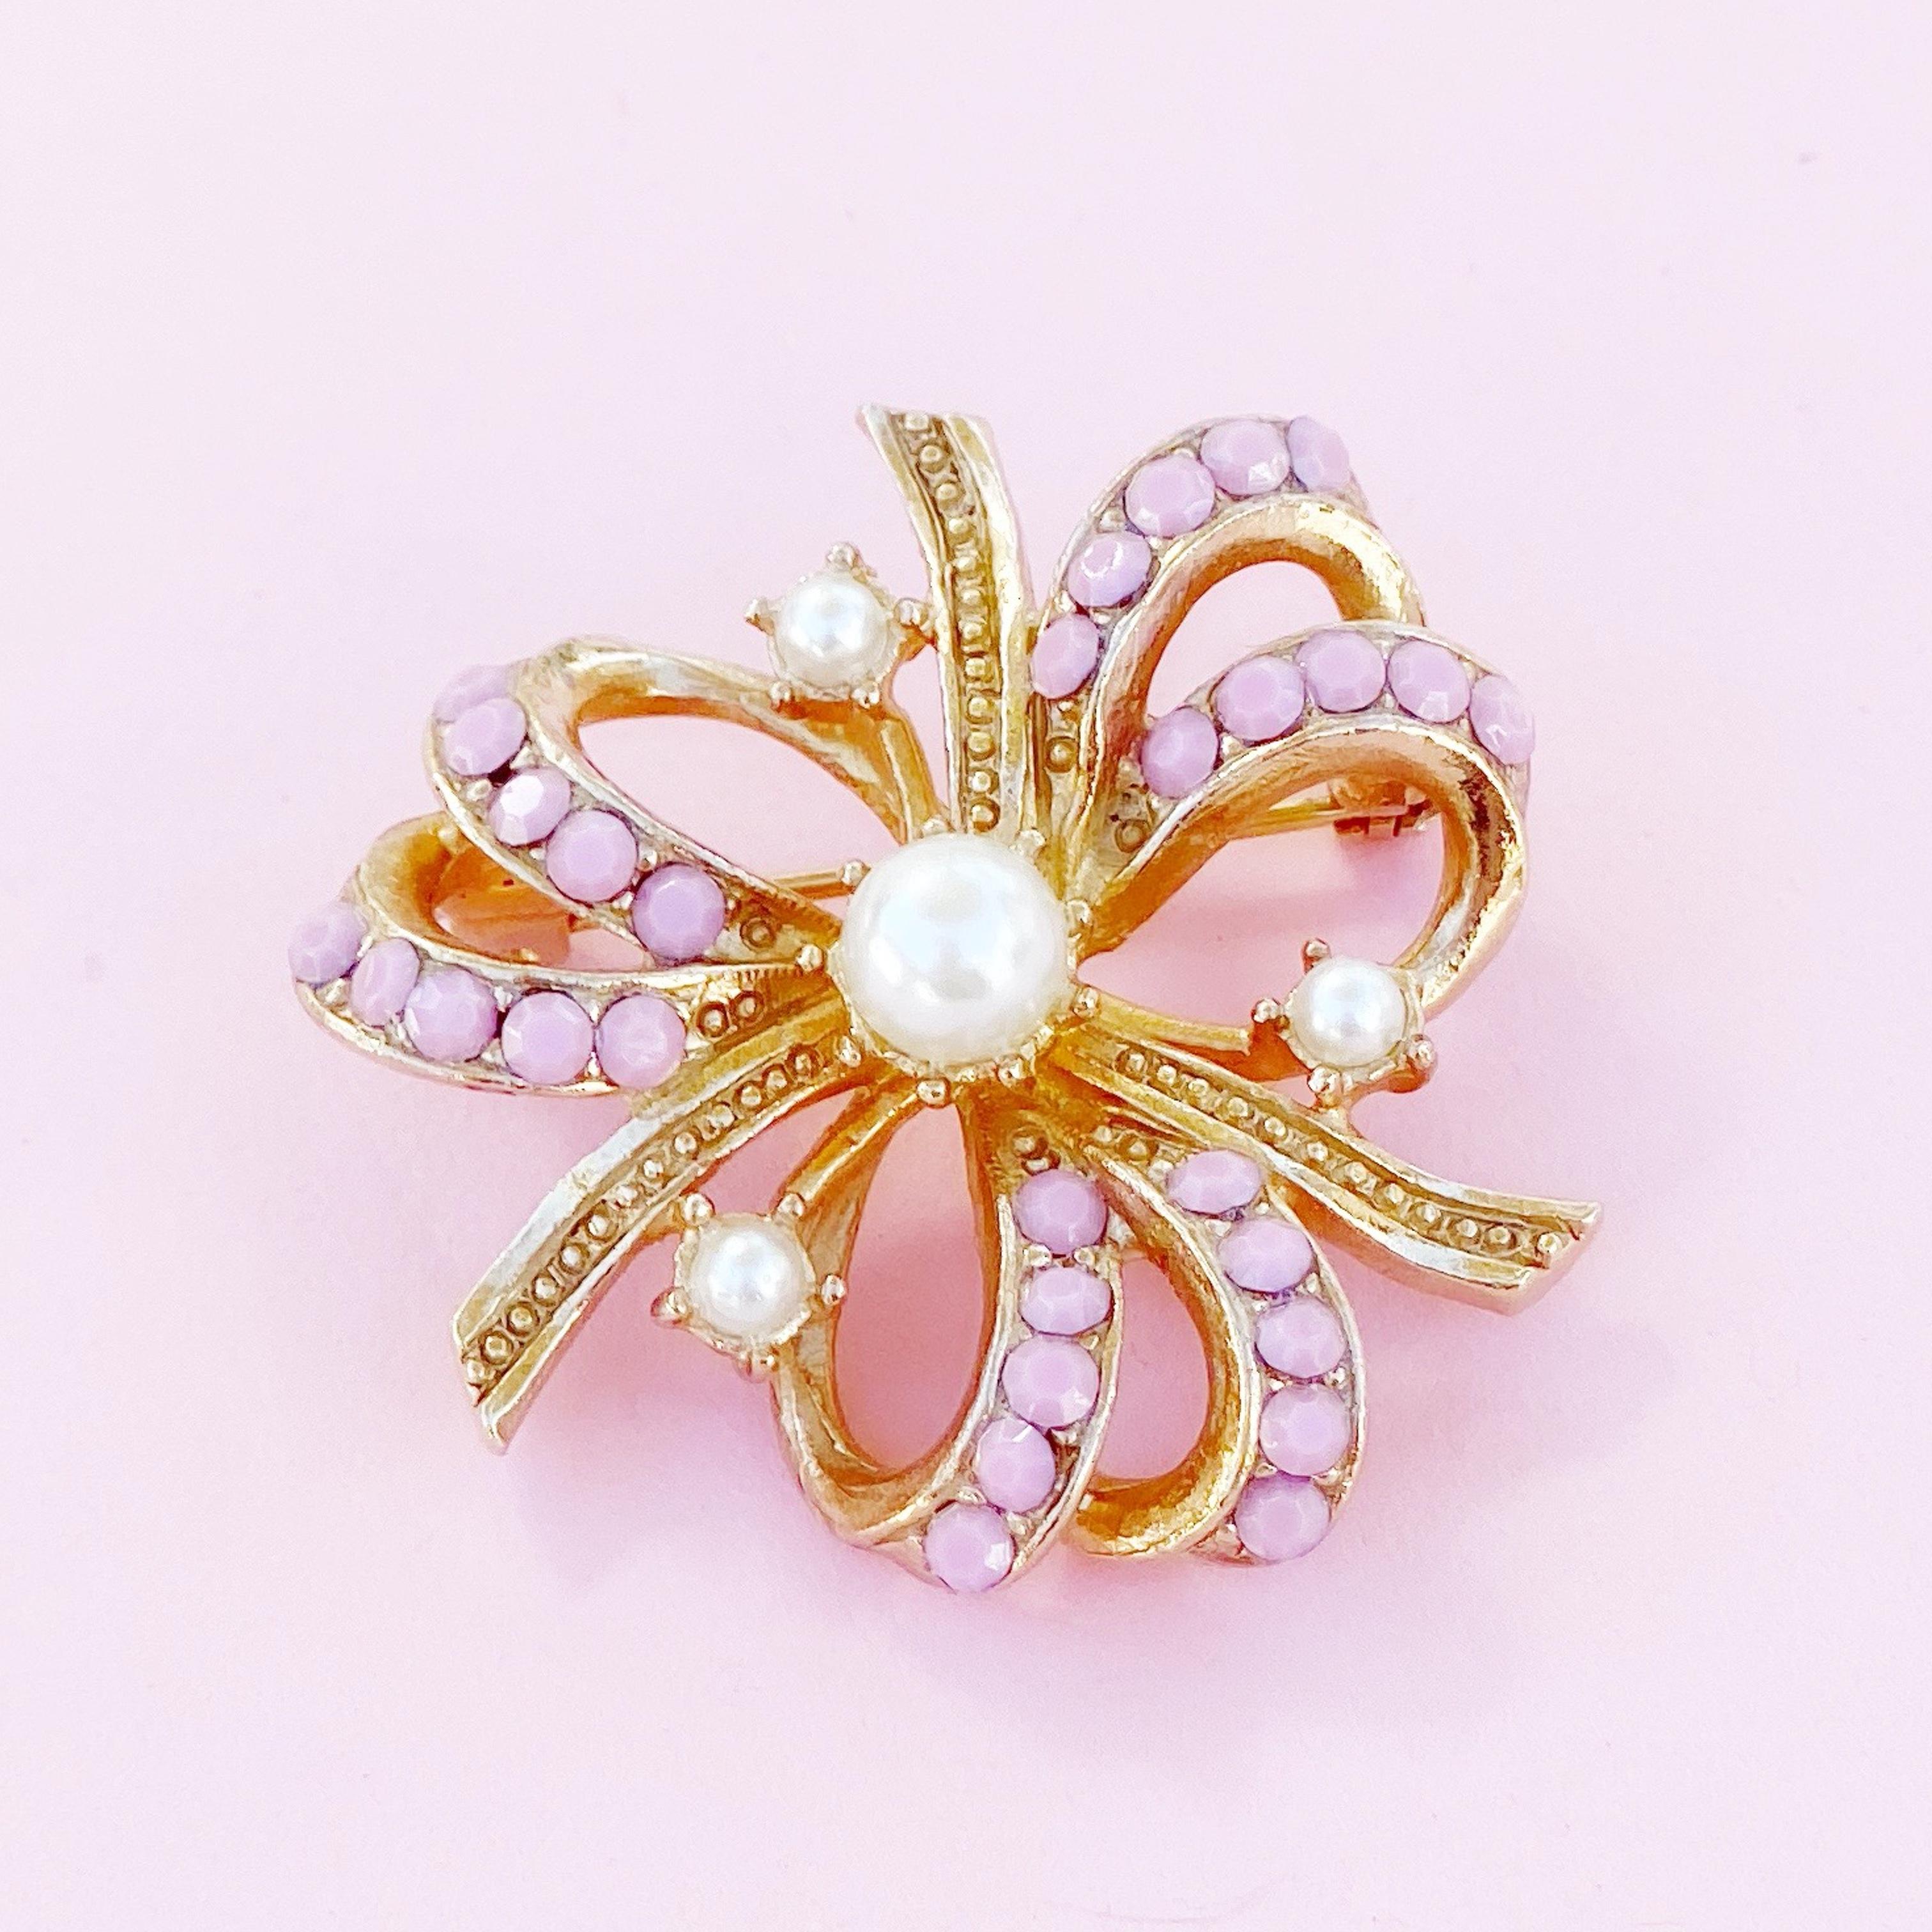 Modern Gilt & Pastel Pink Rhinestone Bow Brooch With Pearl Accents By Hollycraft, 1950s